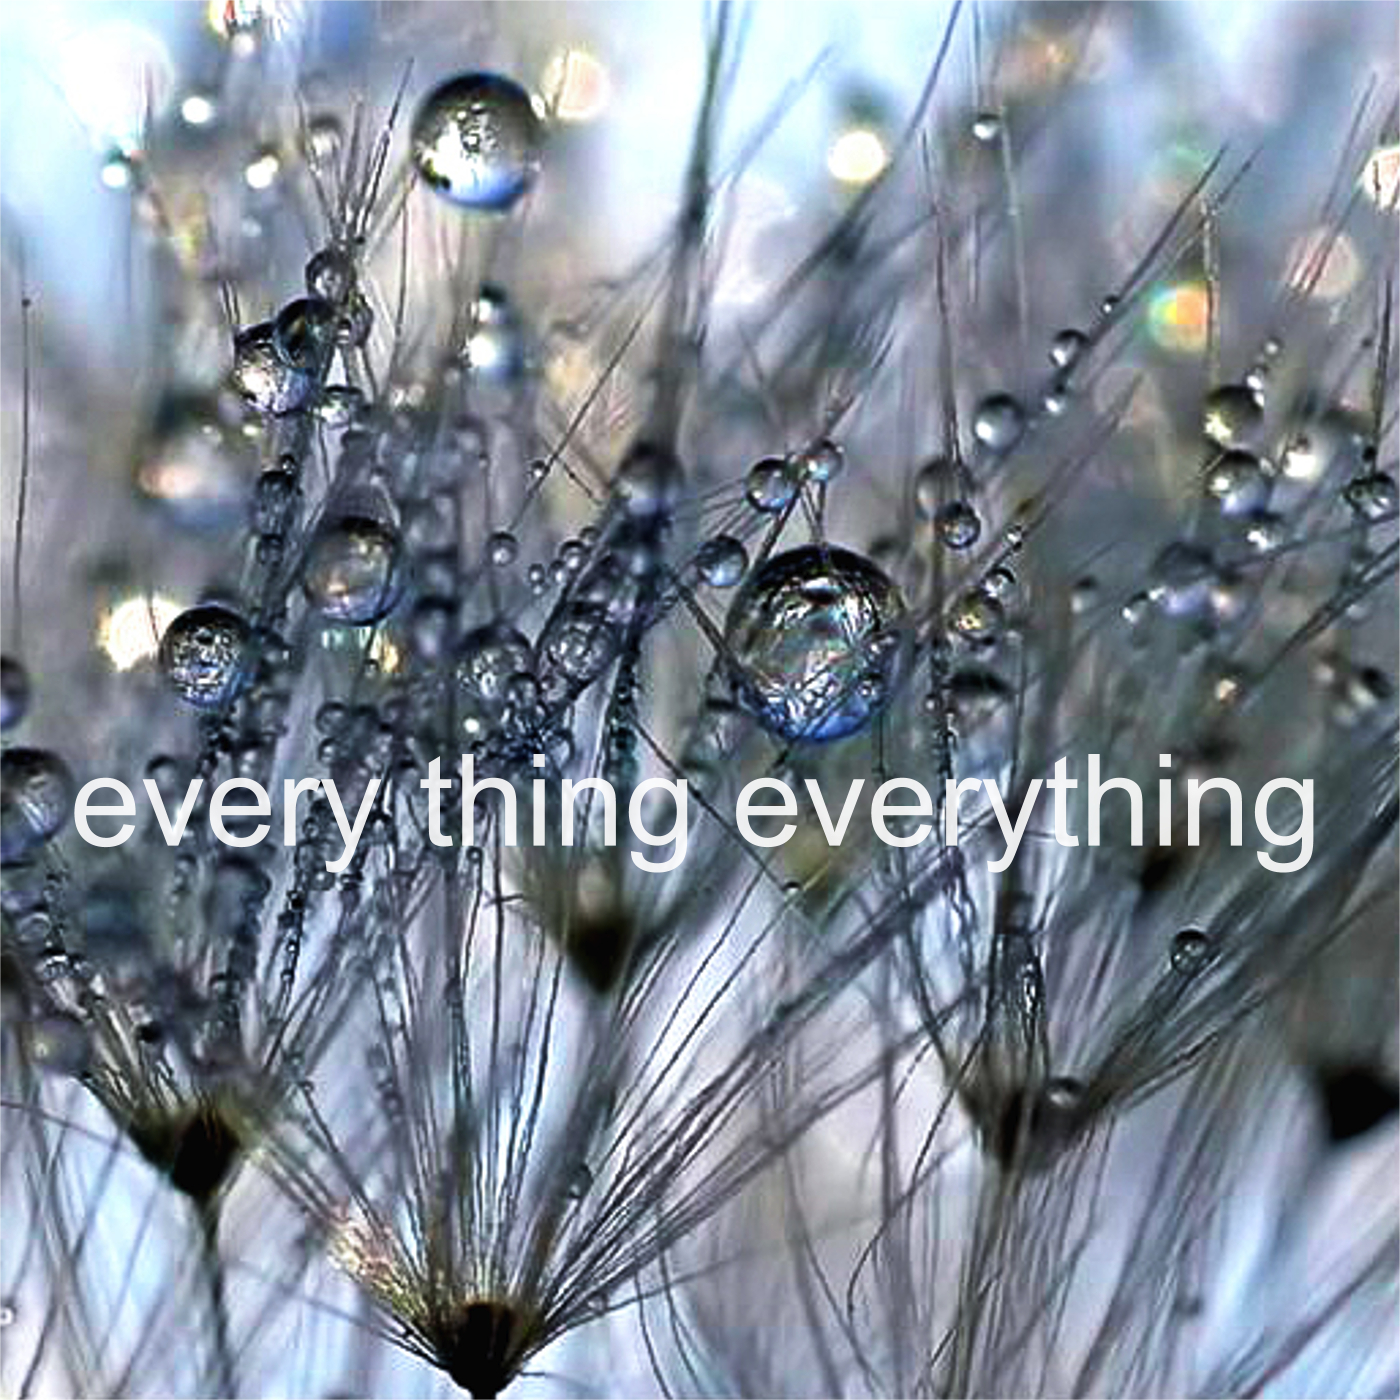 Stephanie Rearick - every thing everything